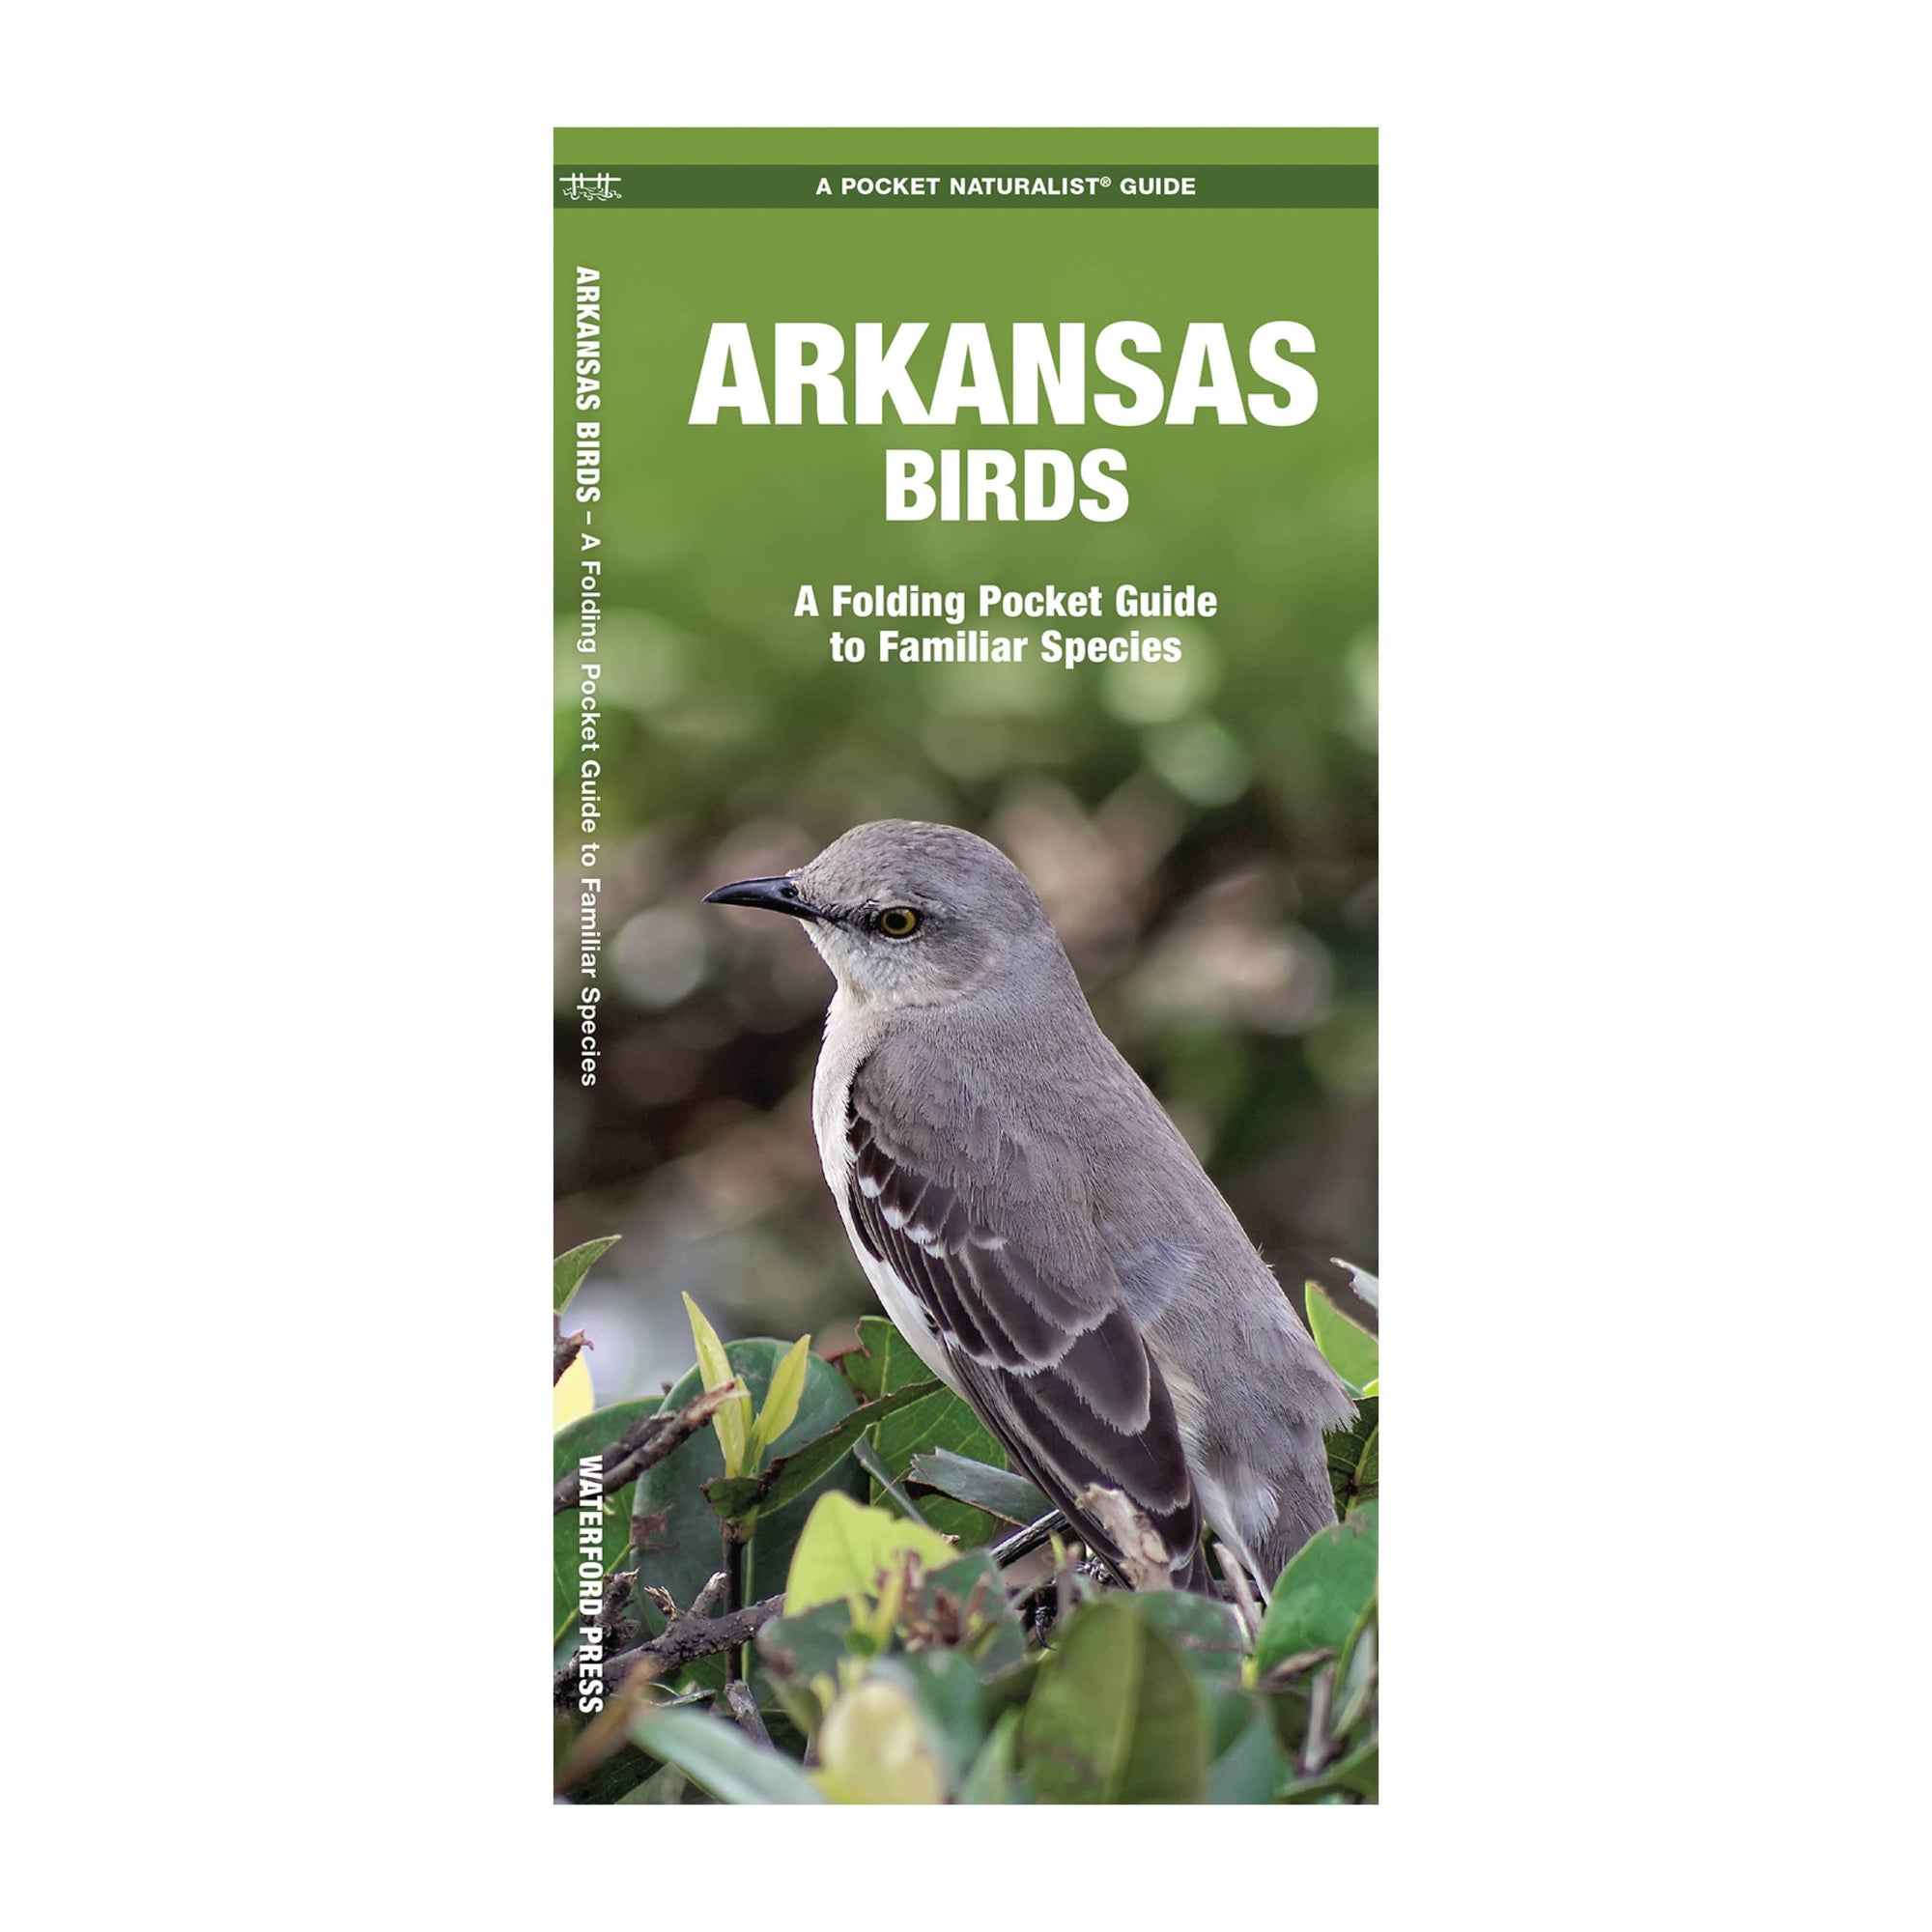 Cover of the "Arkansas Birds" Folding Pocket Guide to Familiar Species, featuring a photo of a grey bird perched in green foliage.